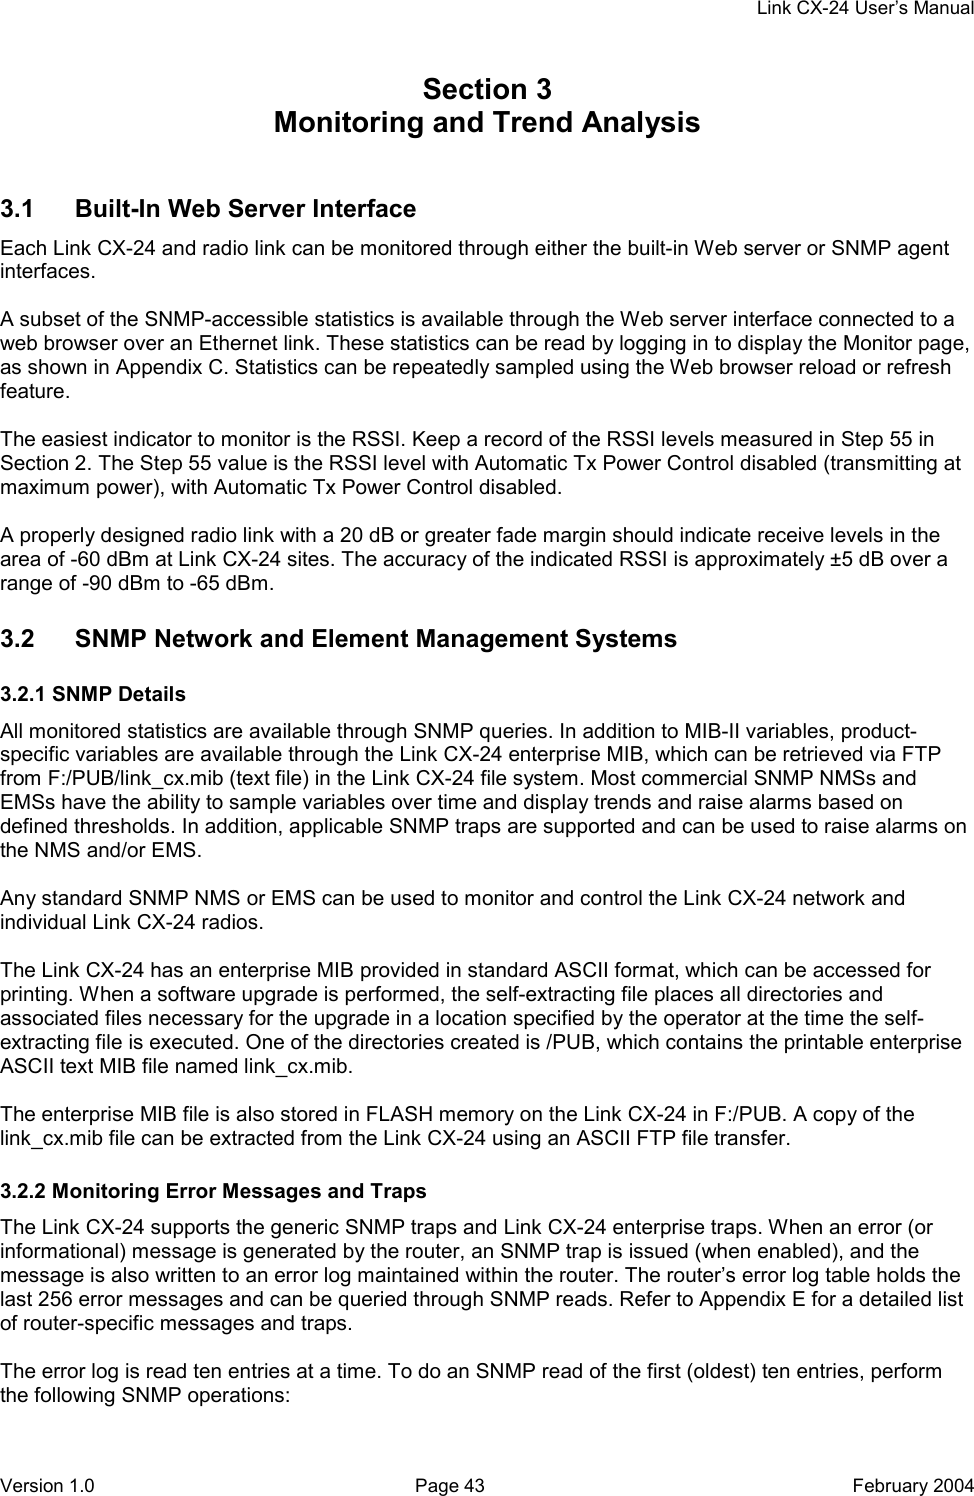     Link CX-24 User’s Manual Version 1.0  Page 43  February 2004 Section 3    Monitoring and Trend Analysis 60000 3.1  Built-In Web Server Interface Each Link CX-24 and radio link can be monitored through either the built-in Web server or SNMP agent interfaces.  A subset of the SNMP-accessible statistics is available through the Web server interface connected to a web browser over an Ethernet link. These statistics can be read by logging in to display the Monitor page, as shown in Appendix C. Statistics can be repeatedly sampled using the Web browser reload or refresh feature.  The easiest indicator to monitor is the RSSI. Keep a record of the RSSI levels measured in Step 55 in Section 2. The Step 55 value is the RSSI level with Automatic Tx Power Control disabled (transmitting at maximum power), with Automatic Tx Power Control disabled.  A properly designed radio link with a 20 dB or greater fade margin should indicate receive levels in the area of -60 dBm at Link CX-24 sites. The accuracy of the indicated RSSI is approximately ±5 dB over a range of -90 dBm to -65 dBm. 3.2  SNMP Network and Element Management Systems 3.2.1 SNMP Details All monitored statistics are available through SNMP queries. In addition to MIB-II variables, product-specific variables are available through the Link CX-24 enterprise MIB, which can be retrieved via FTP from F:/PUB/link_cx.mib (text file) in the Link CX-24 file system. Most commercial SNMP NMSs and EMSs have the ability to sample variables over time and display trends and raise alarms based on defined thresholds. In addition, applicable SNMP traps are supported and can be used to raise alarms on the NMS and/or EMS.  Any standard SNMP NMS or EMS can be used to monitor and control the Link CX-24 network and individual Link CX-24 radios.  The Link CX-24 has an enterprise MIB provided in standard ASCII format, which can be accessed for printing. When a software upgrade is performed, the self-extracting file places all directories and associated files necessary for the upgrade in a location specified by the operator at the time the self-extracting file is executed. One of the directories created is /PUB, which contains the printable enterprise ASCII text MIB file named link_cx.mib.  The enterprise MIB file is also stored in FLASH memory on the Link CX-24 in F:/PUB. A copy of the link_cx.mib file can be extracted from the Link CX-24 using an ASCII FTP file transfer. 3.2.2 Monitoring Error Messages and Traps The Link CX-24 supports the generic SNMP traps and Link CX-24 enterprise traps. When an error (or informational) message is generated by the router, an SNMP trap is issued (when enabled), and the message is also written to an error log maintained within the router. The router’s error log table holds the last 256 error messages and can be queried through SNMP reads. Refer to Appendix E for a detailed list of router-specific messages and traps.  The error log is read ten entries at a time. To do an SNMP read of the first (oldest) ten entries, perform the following SNMP operations: 